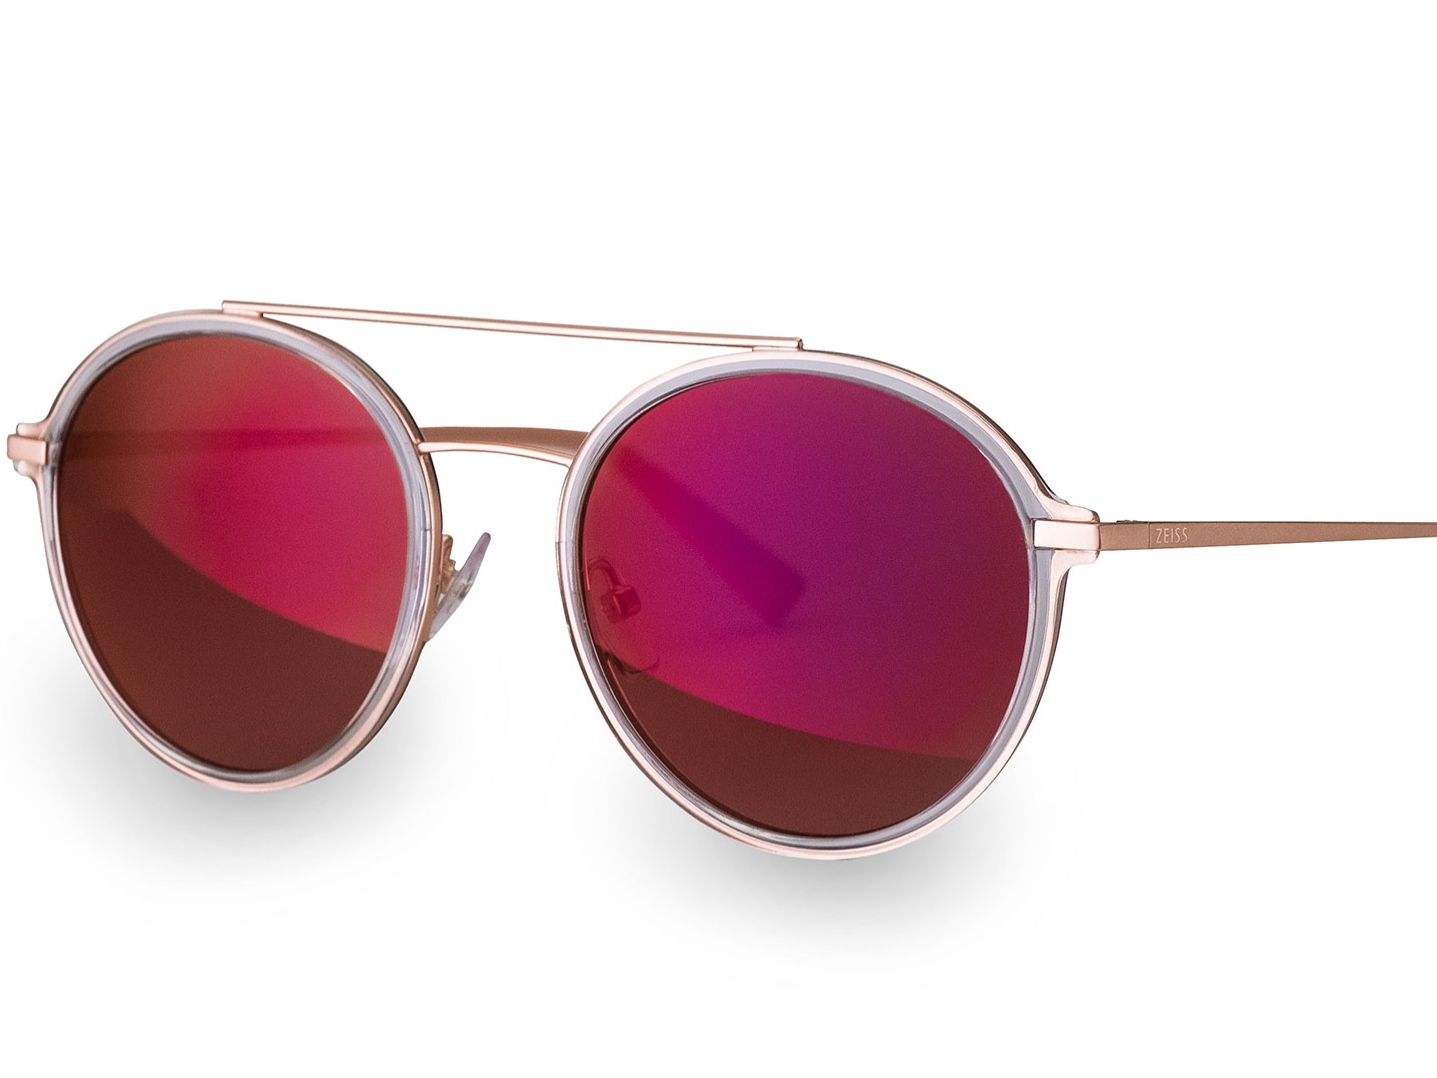 Photograph of fashionable sunglasses with special ZEISS front lens coating in magenta 